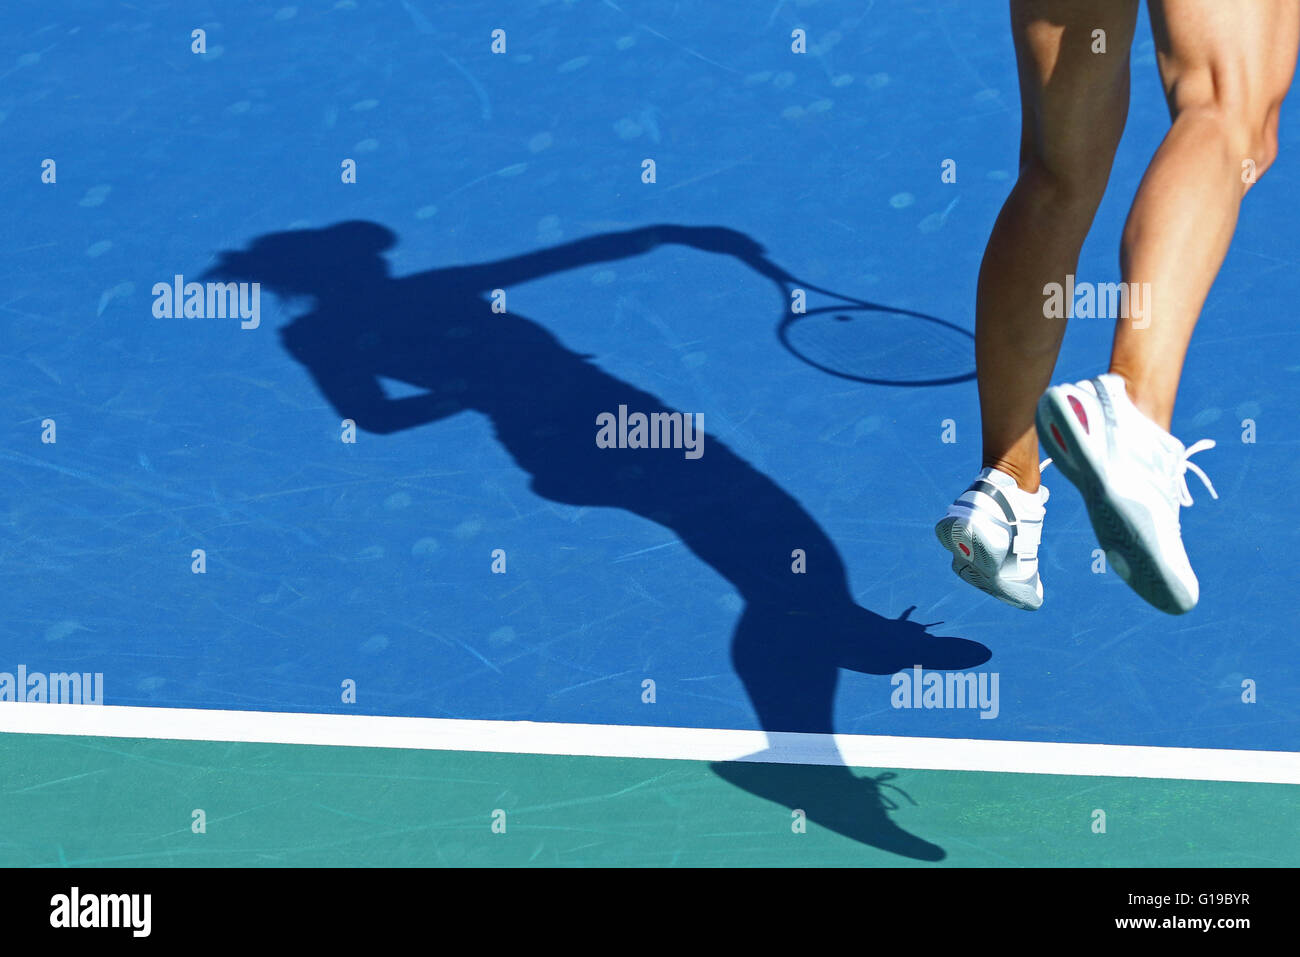 Shadow of woman tennis player, serving the ball Stock Photo